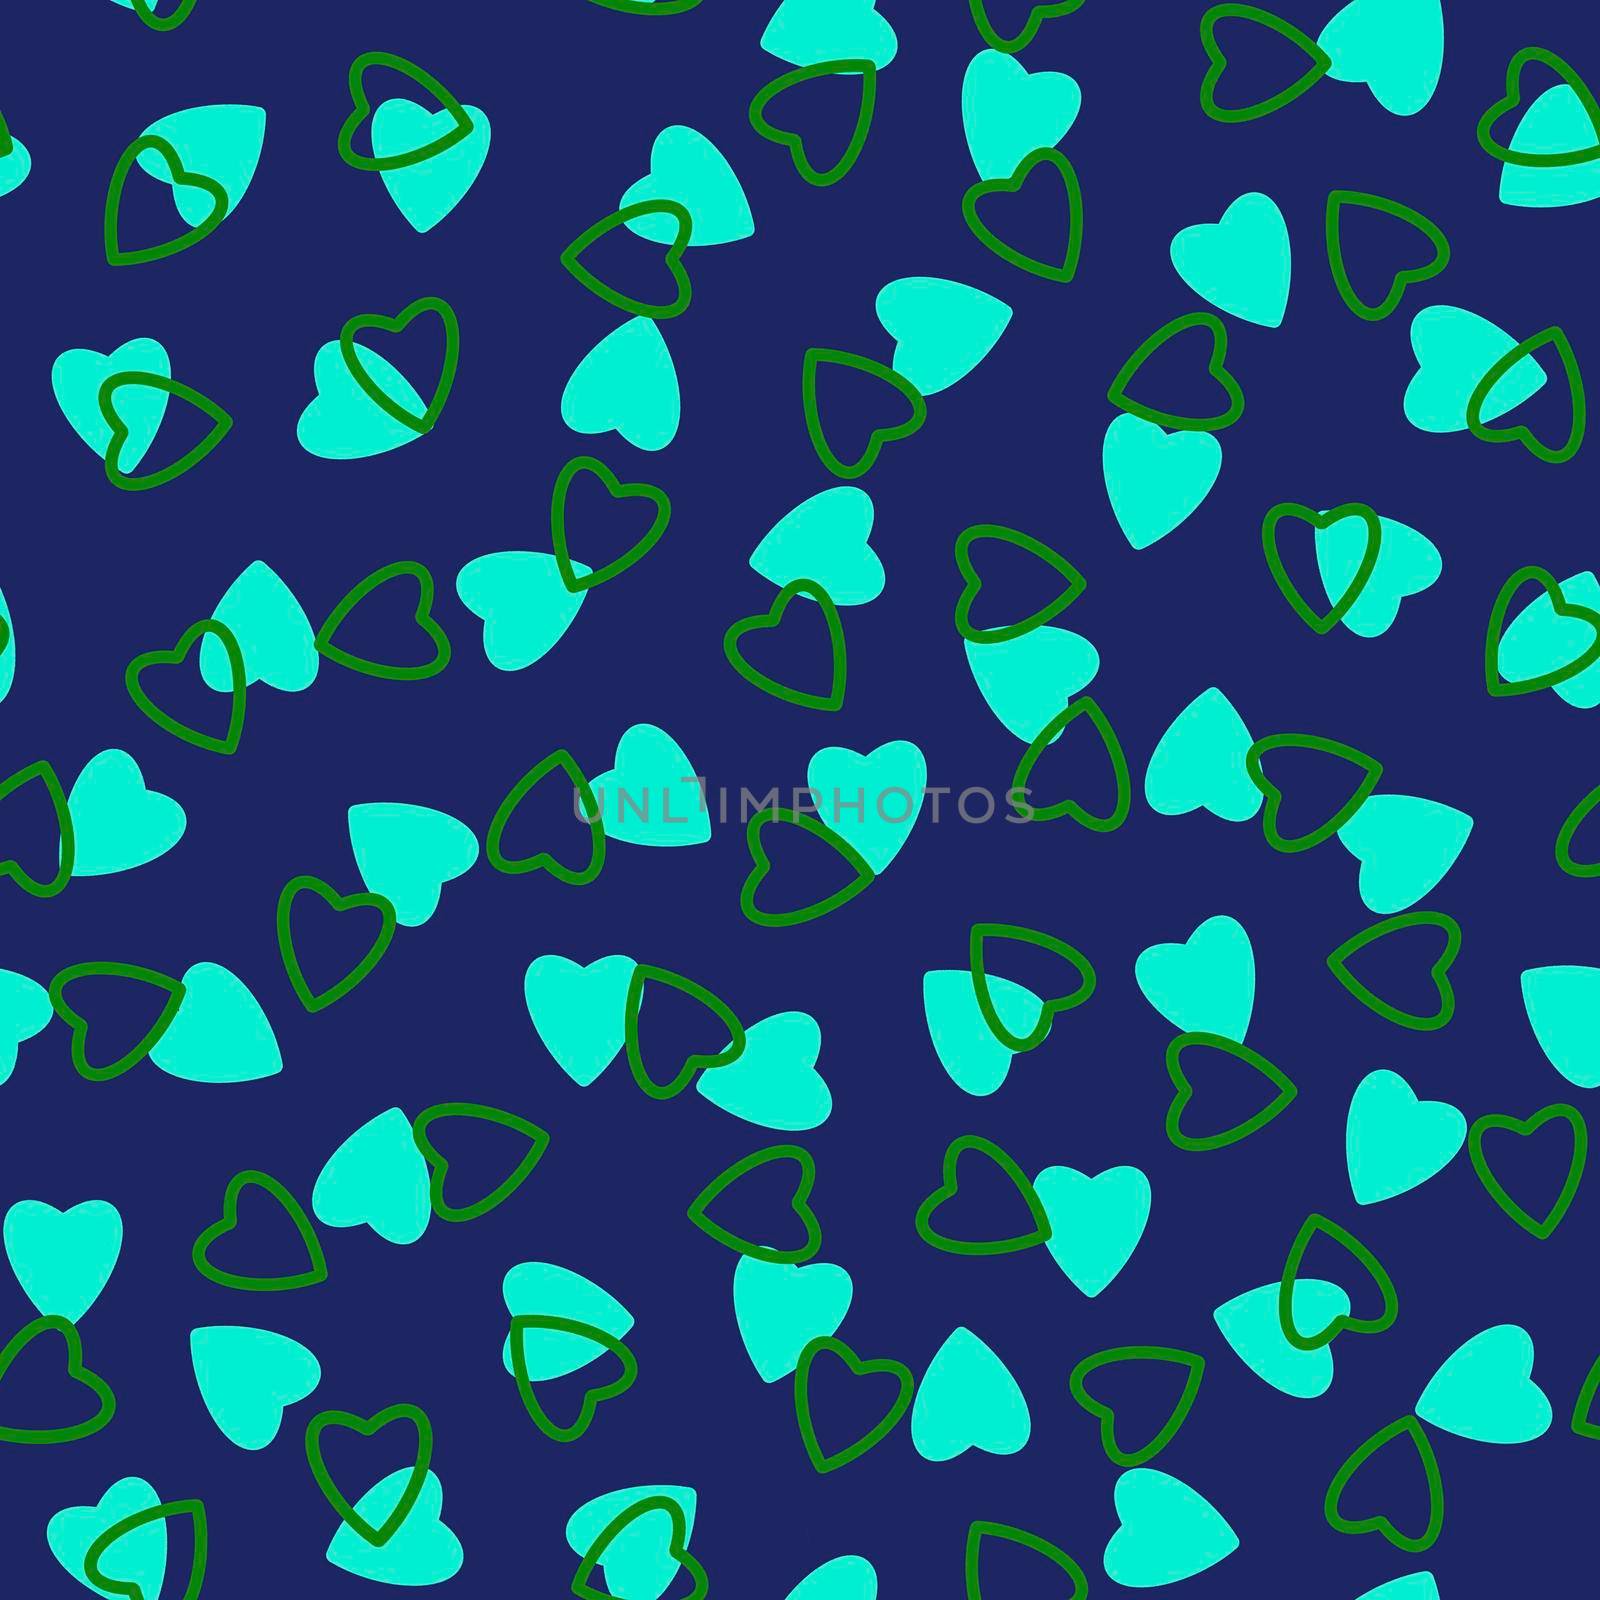 Simple hearts seamless pattern,endless chaotic texture made of tiny heart silhouettes.Valentines,mothers day background.Great for Easter,wedding,scrapbook,gift wrapping paper,textiles.Azure,green,blue by Angelsmoon